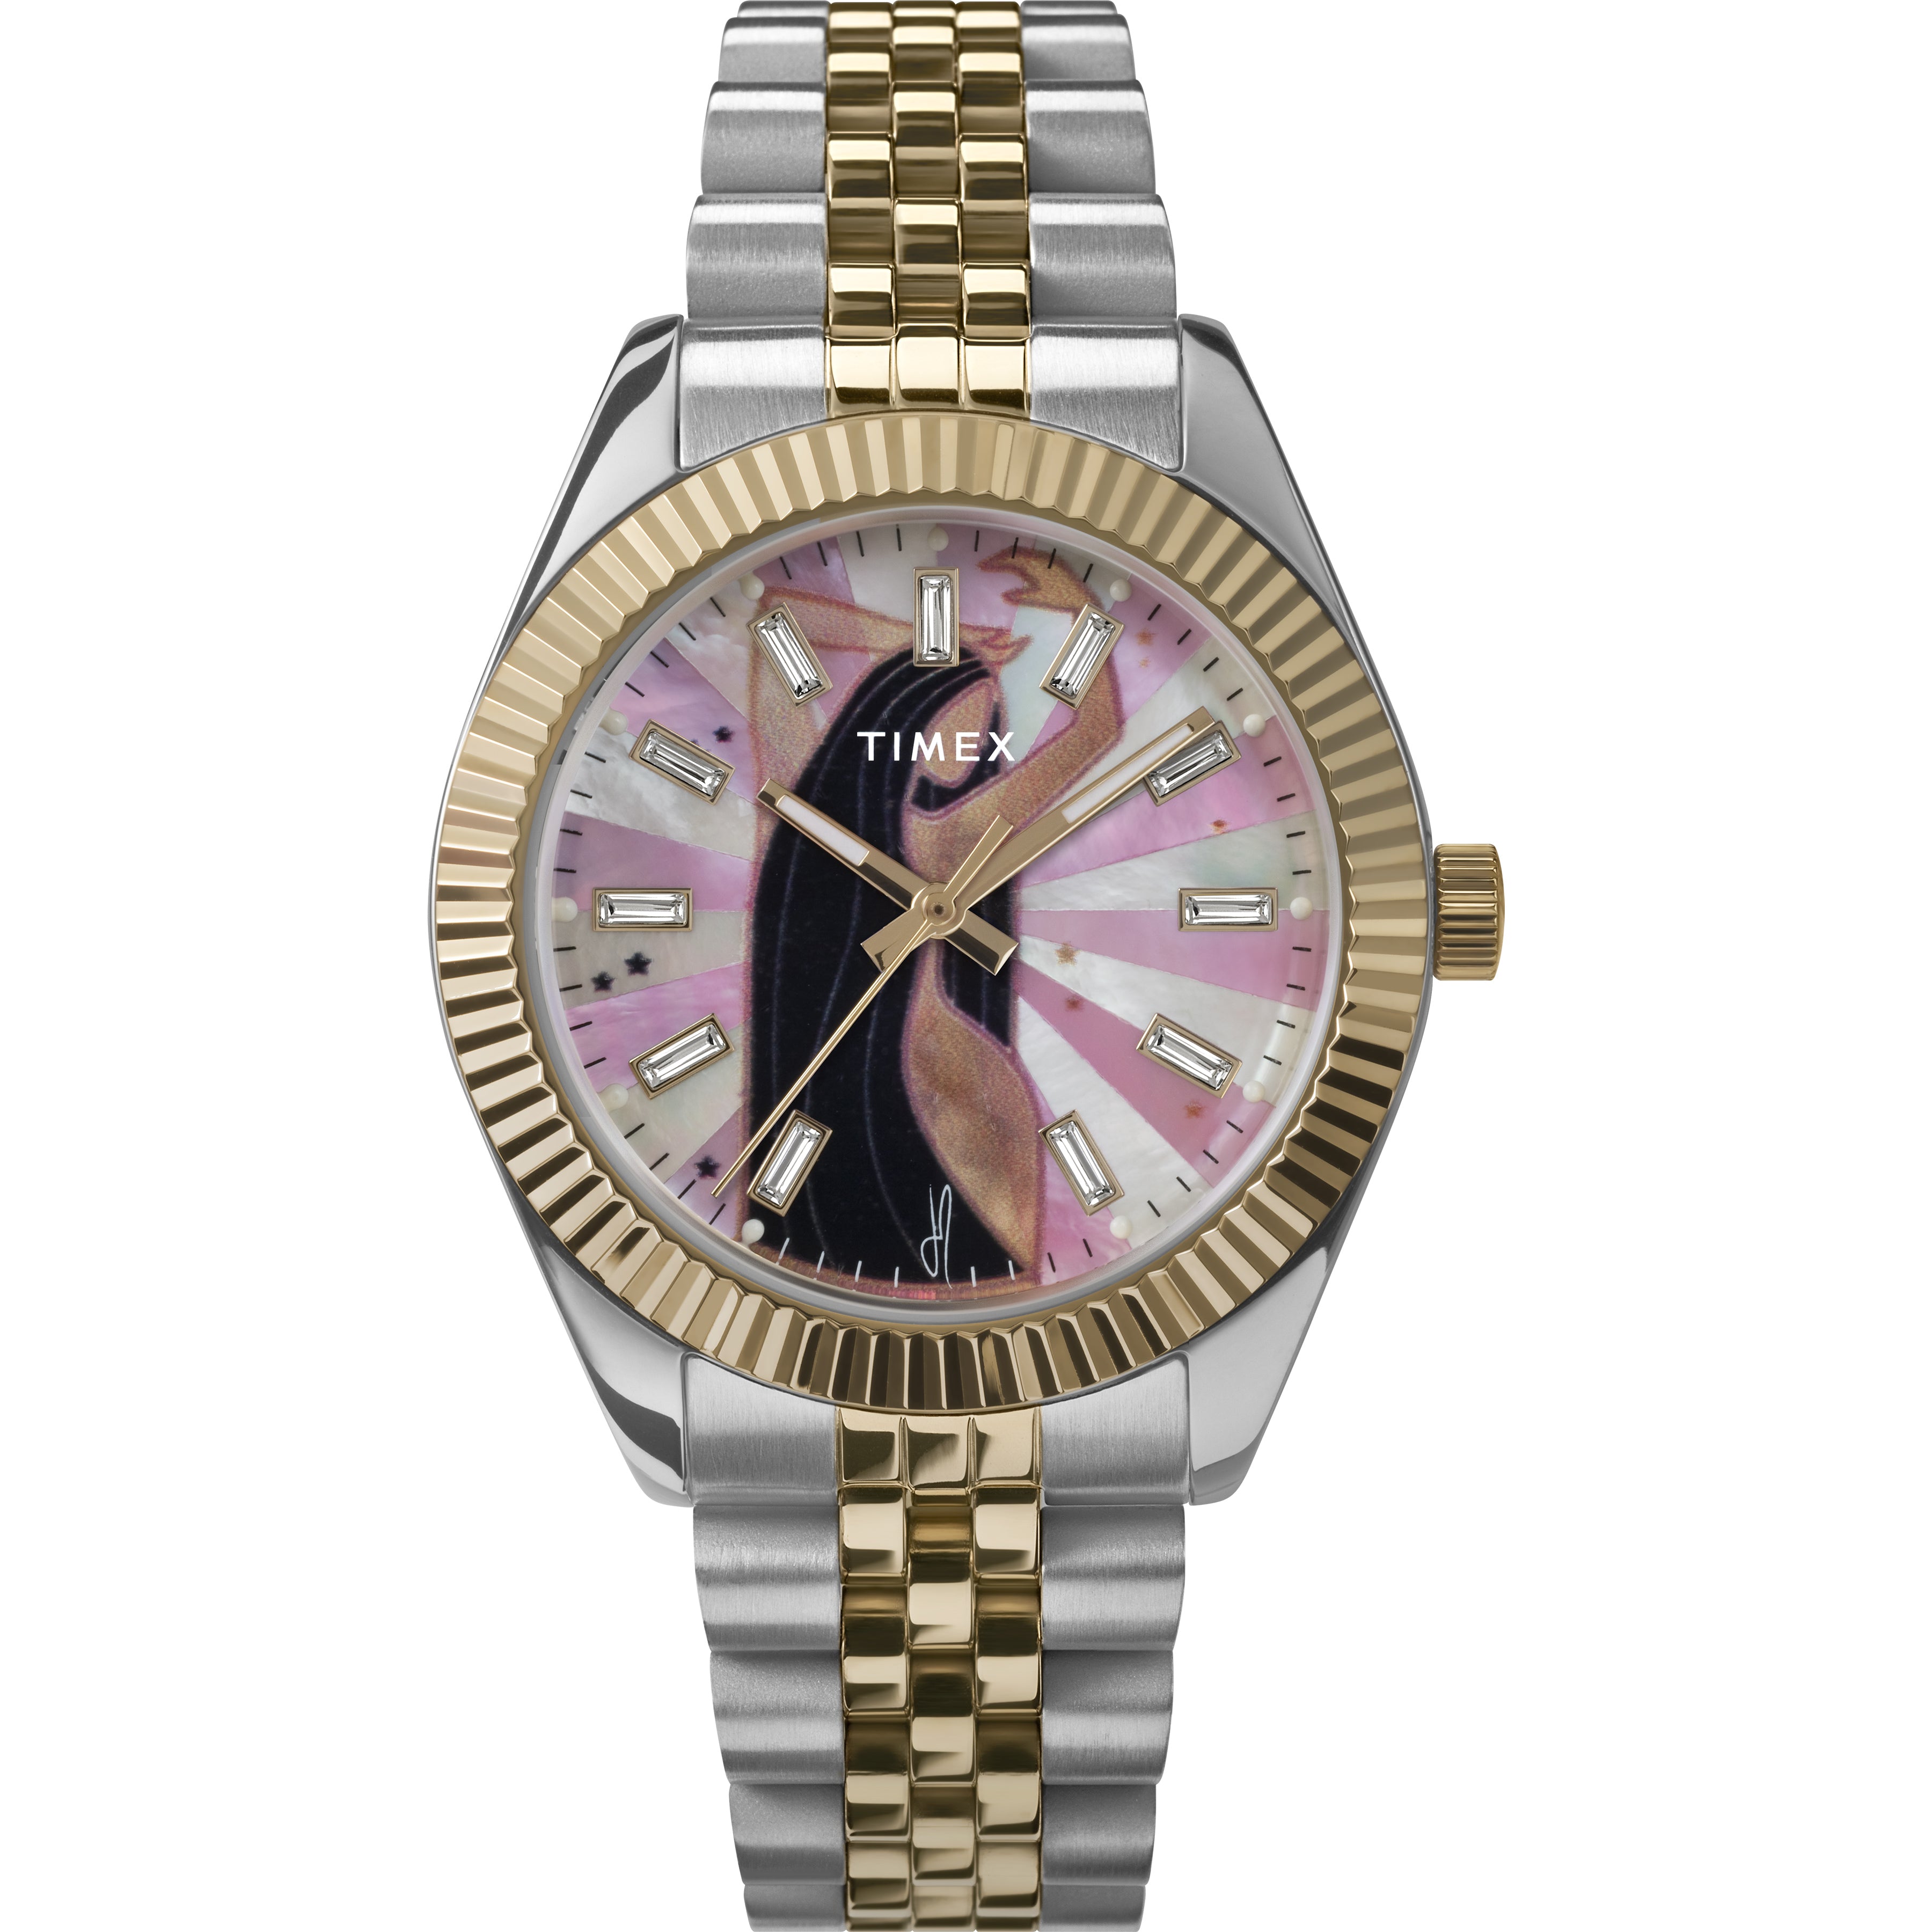 TIMEX X JA LEGACY MUSINGS WATCH PINK MOTHER OF PEARL